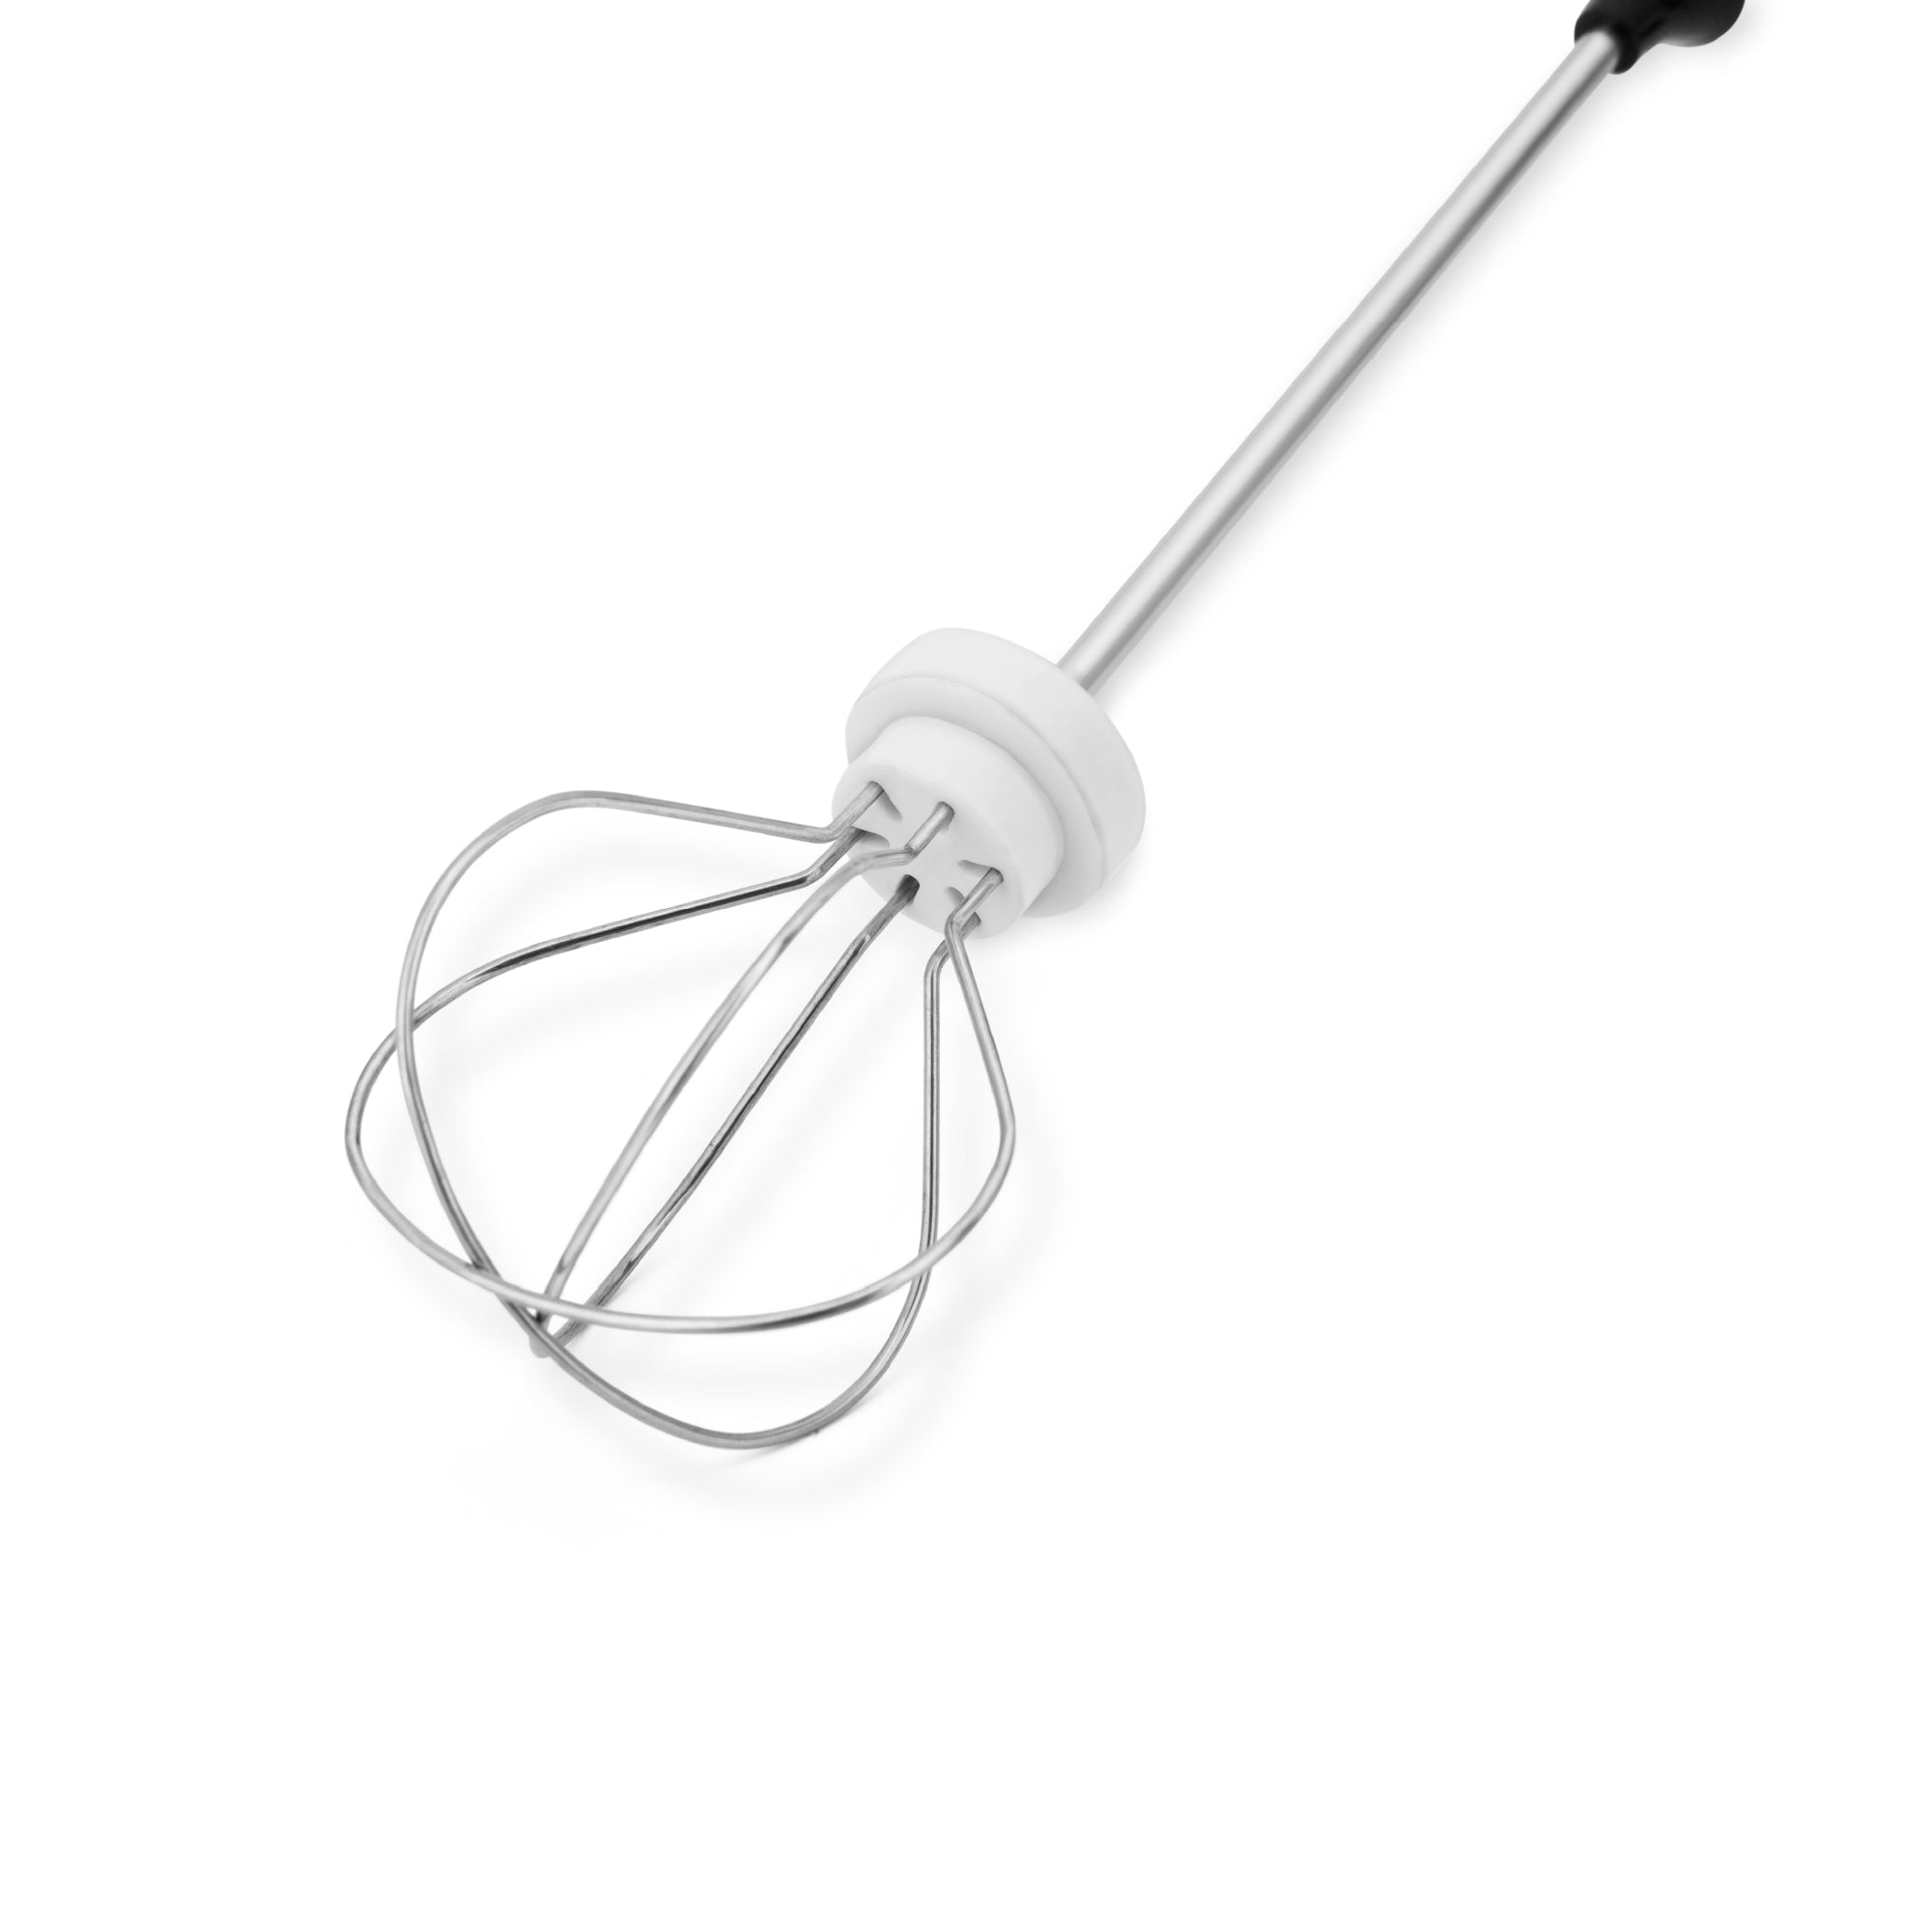 Handheld Stainless Steel Milk Frother